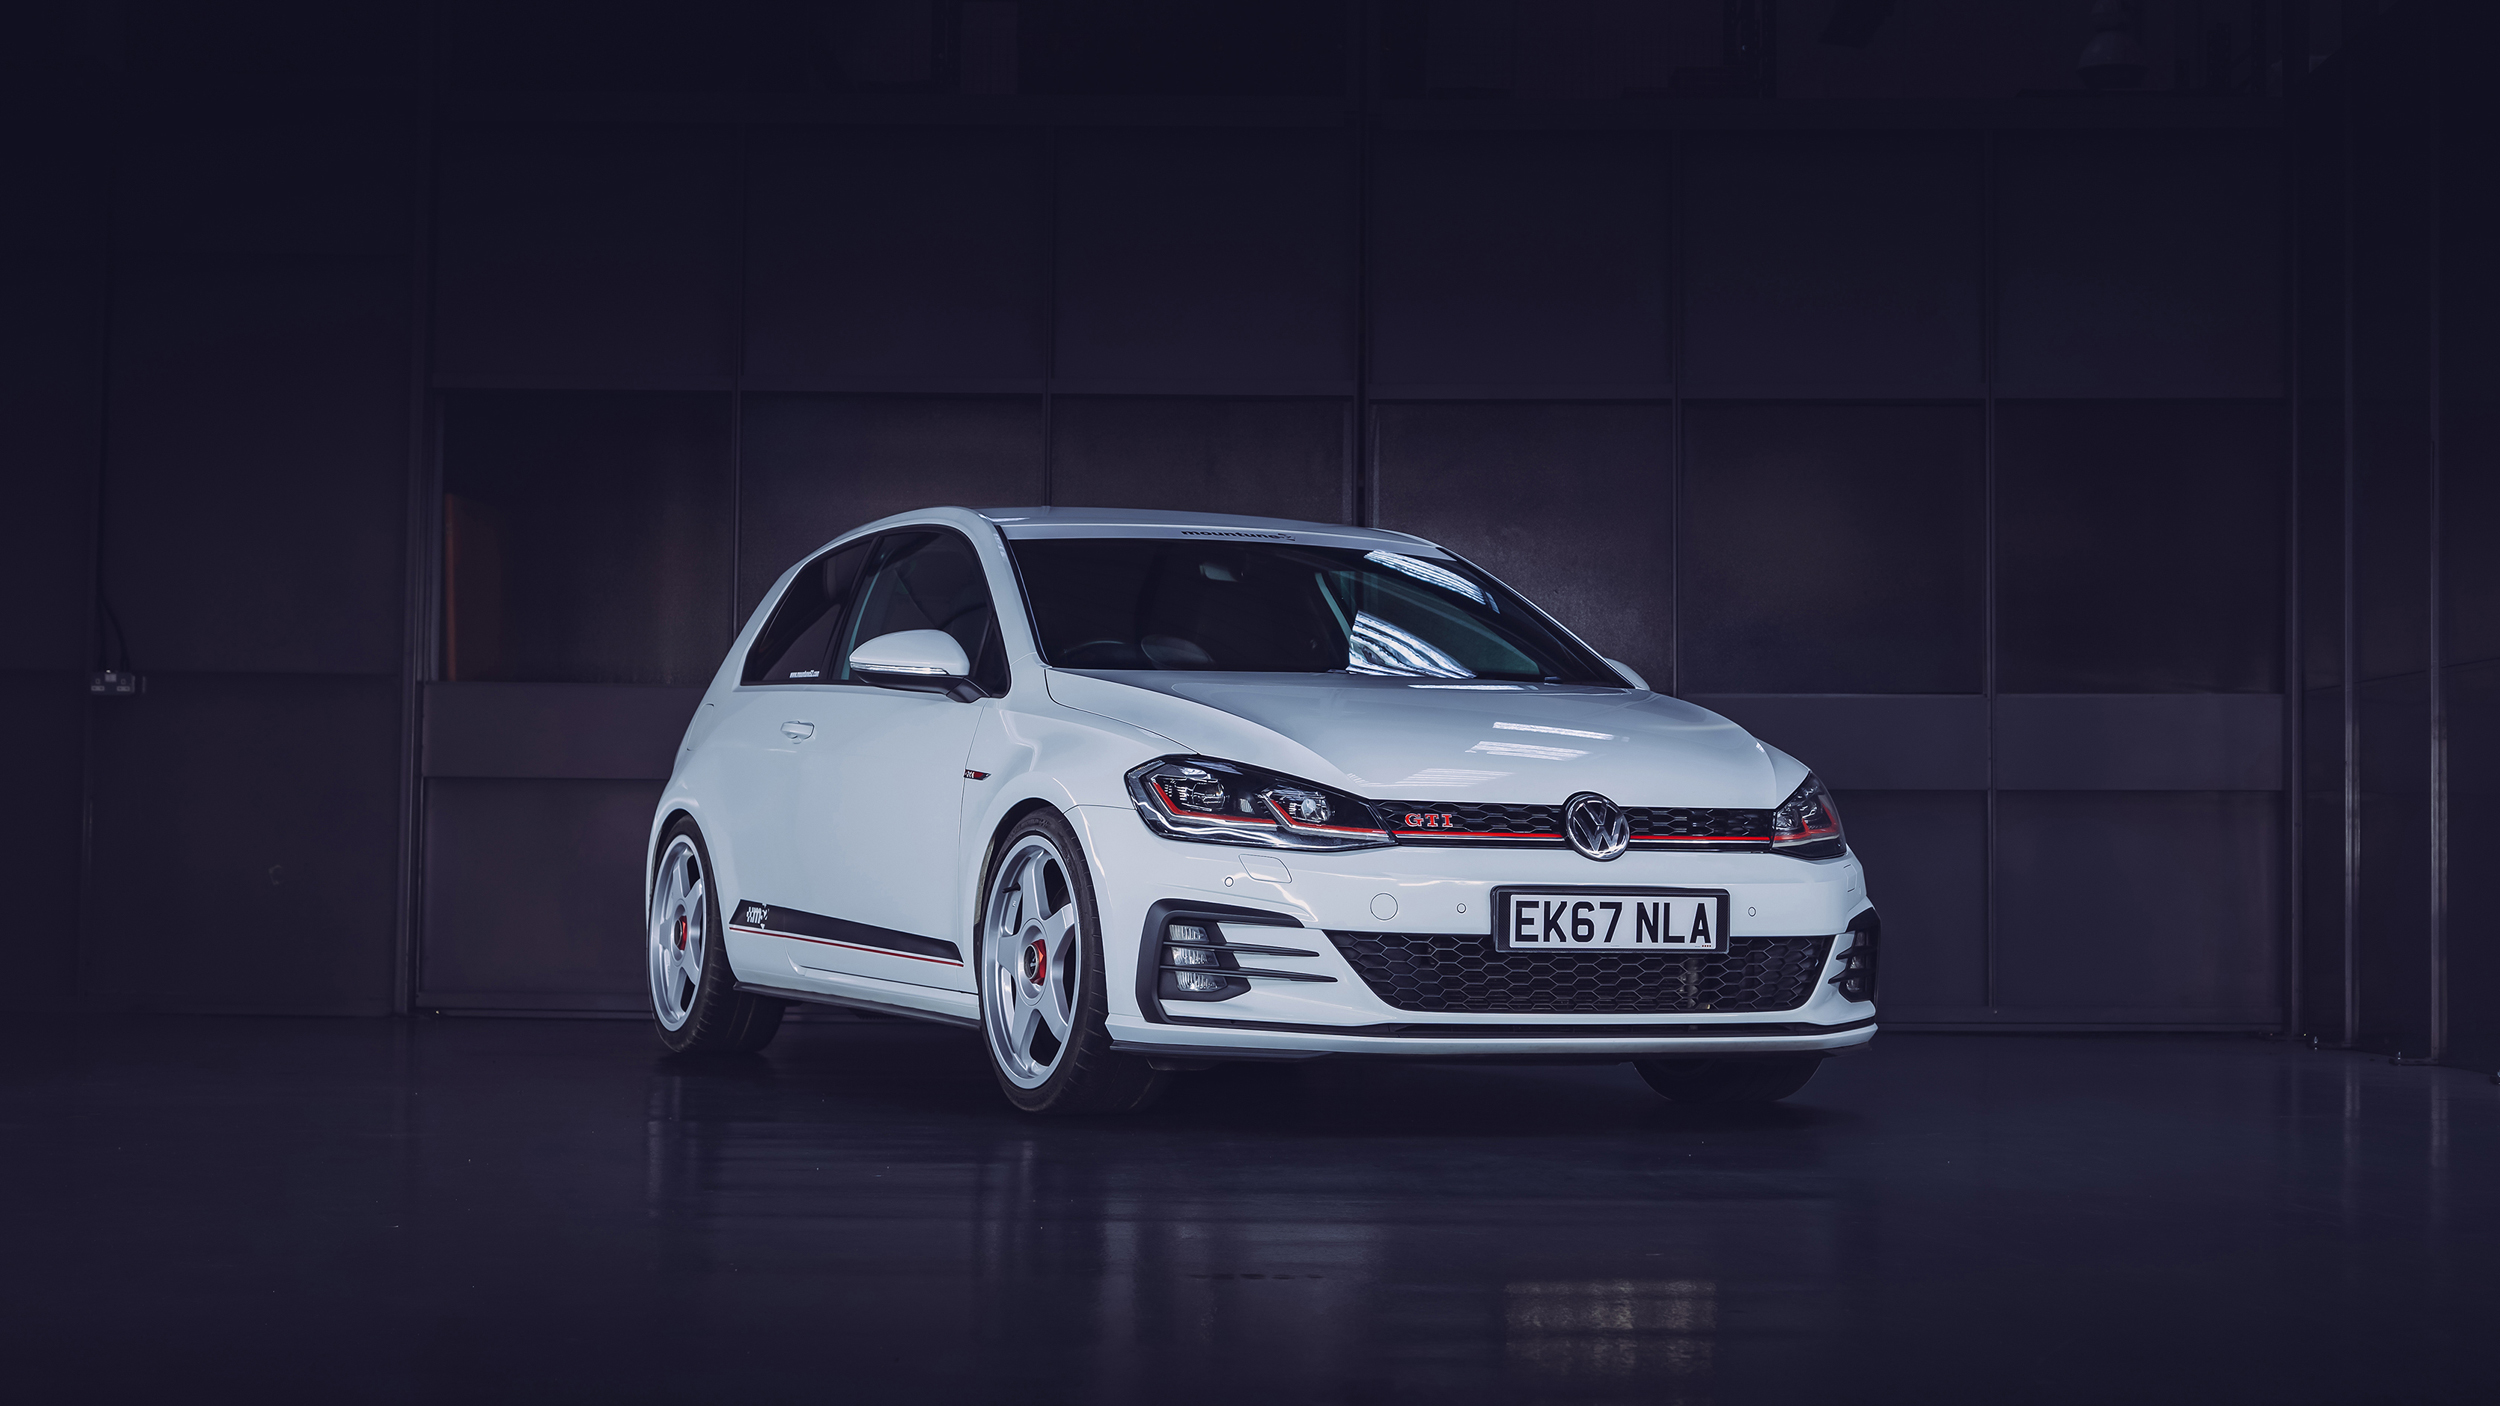 mountune52-s-mk7-vw-gti-has-a-golf-r-turbo-and-380-horsepower